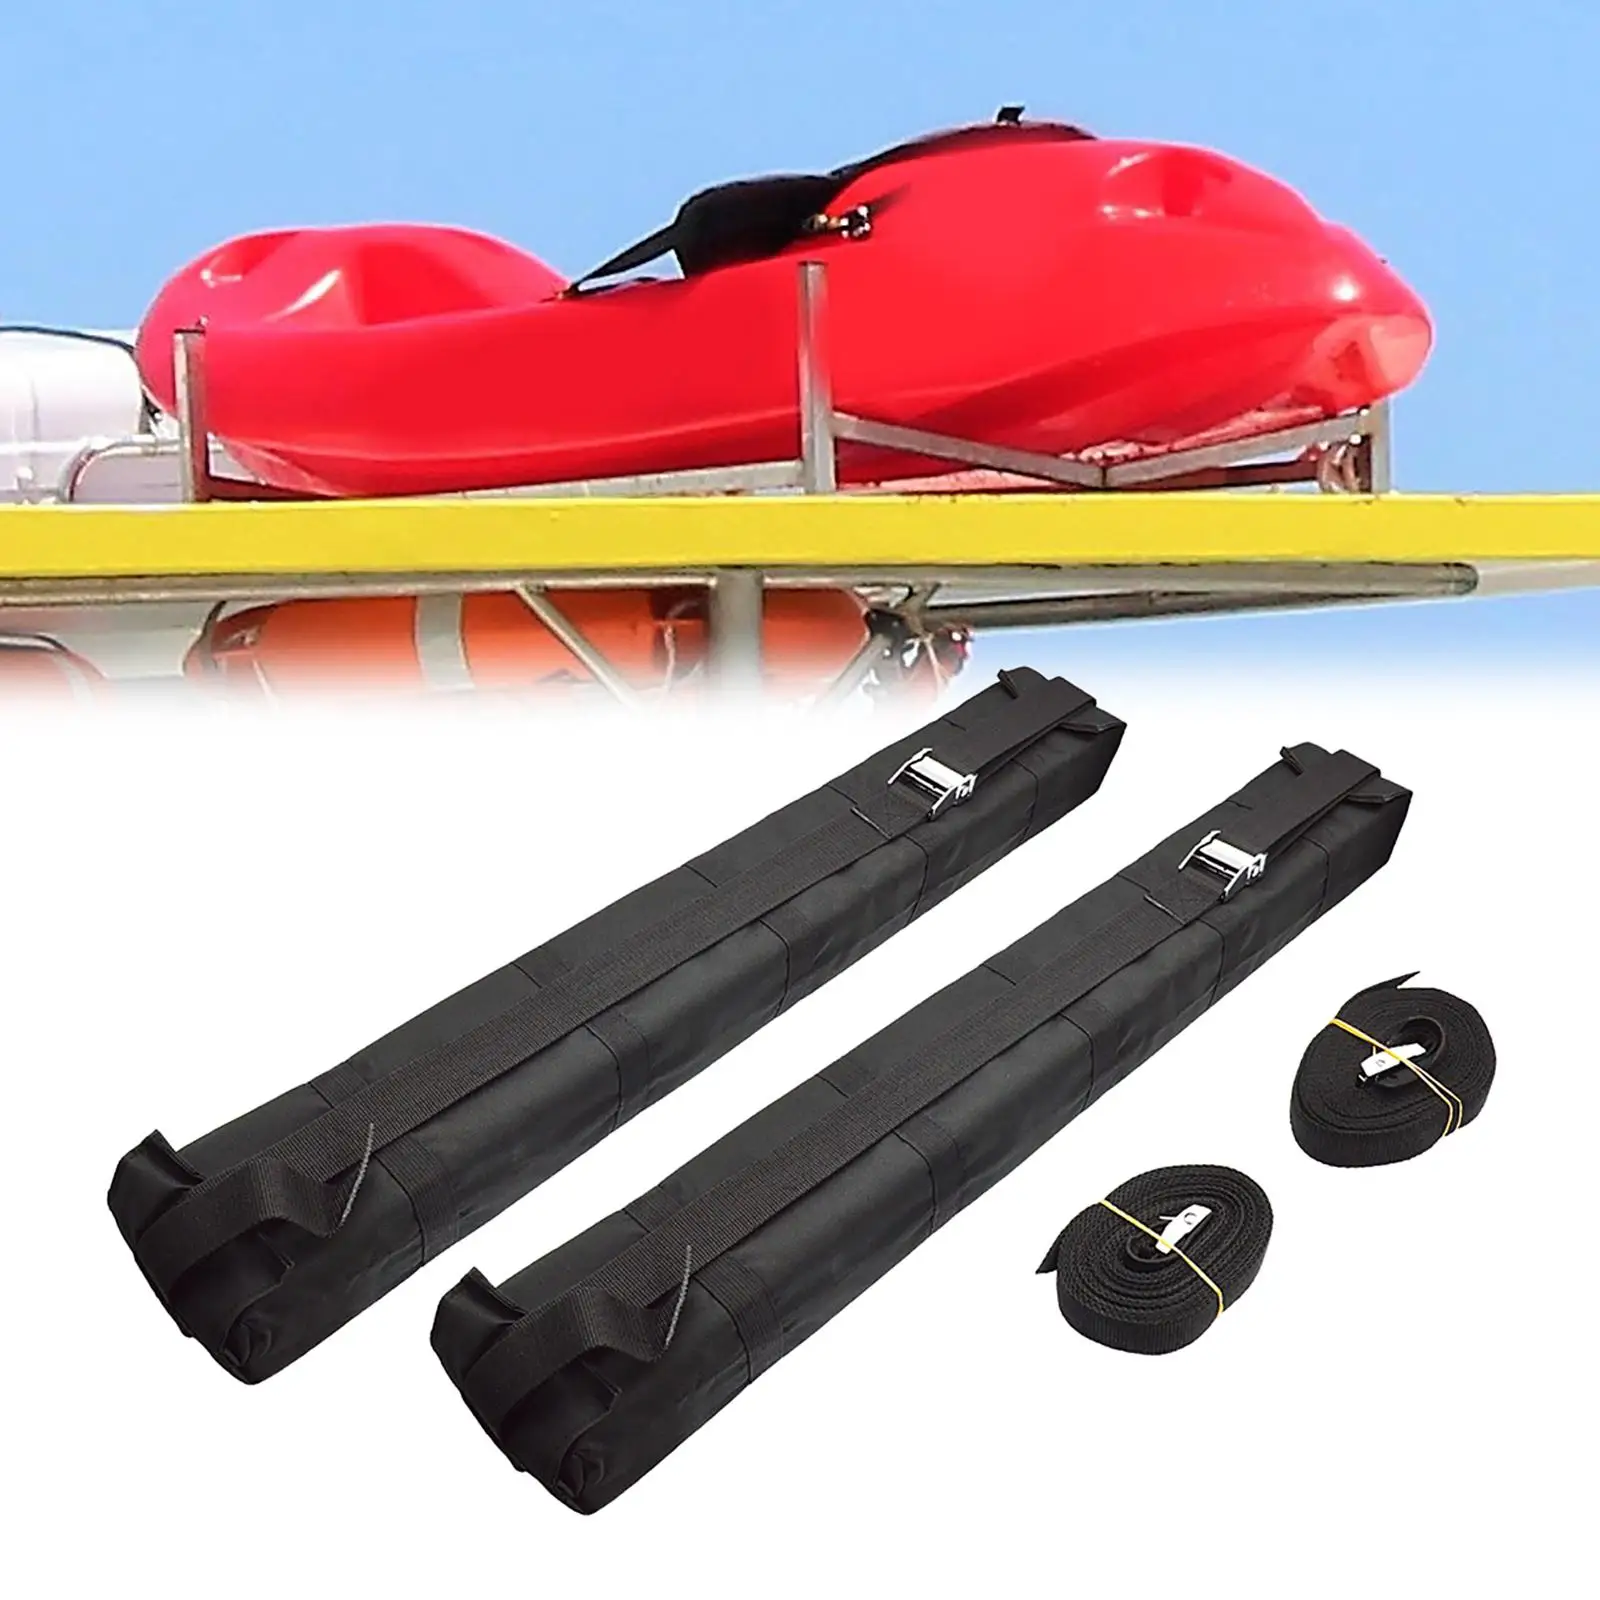 Roof Racks,  Soft Roof Bars, Kayak Roof Rack, Durable Oxford Cloth Roof Rack Pads Carrier Heavy Duty  Straps